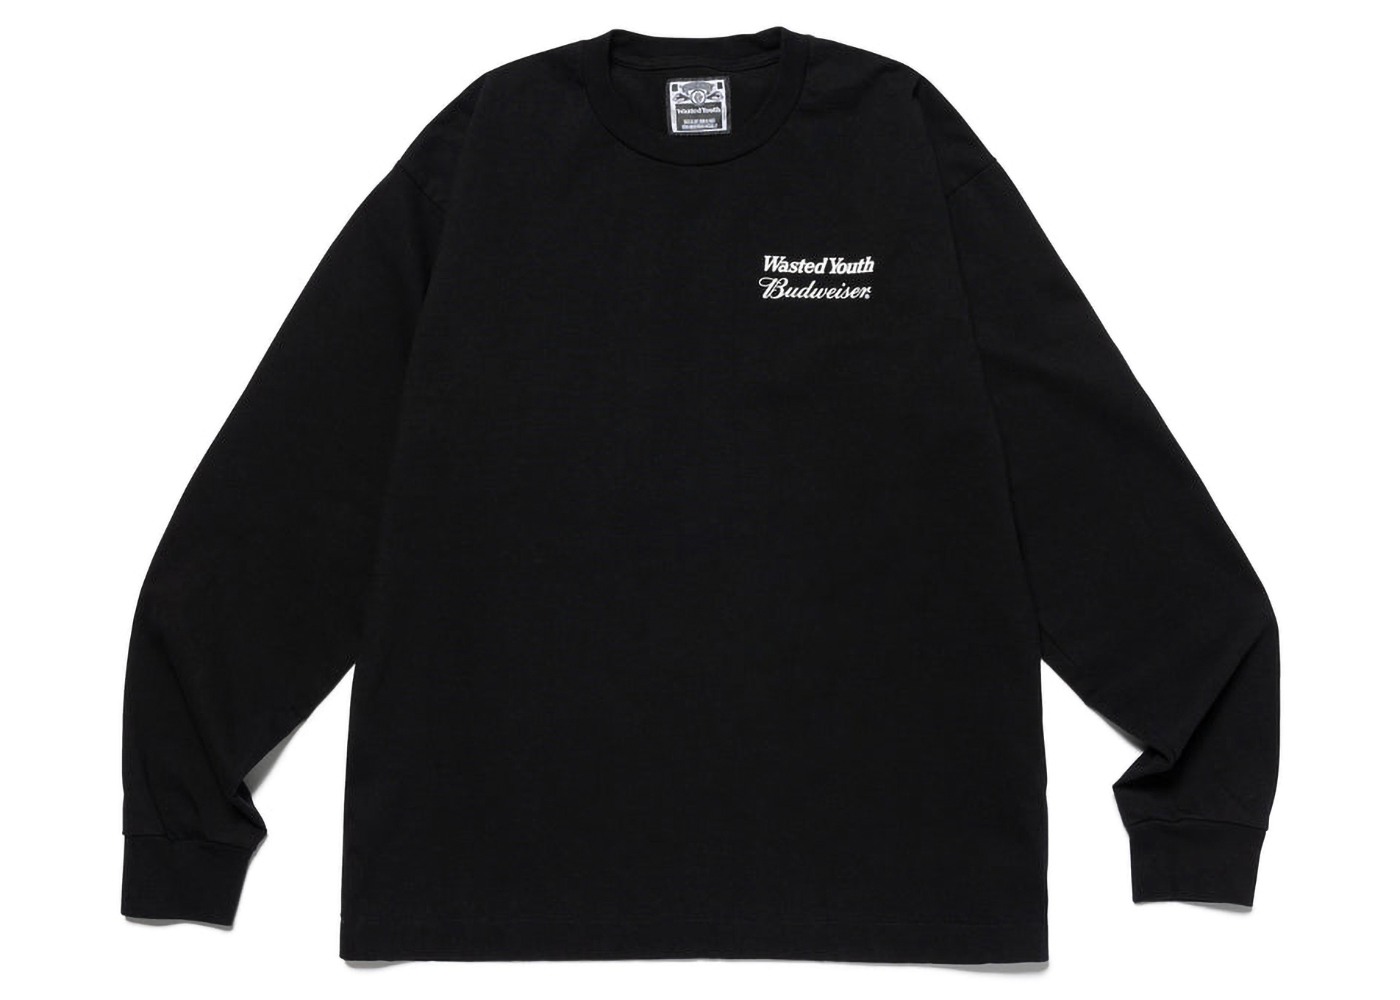 Wasted Youth Budweiser L/S Tee Black Men's - SS23 - US